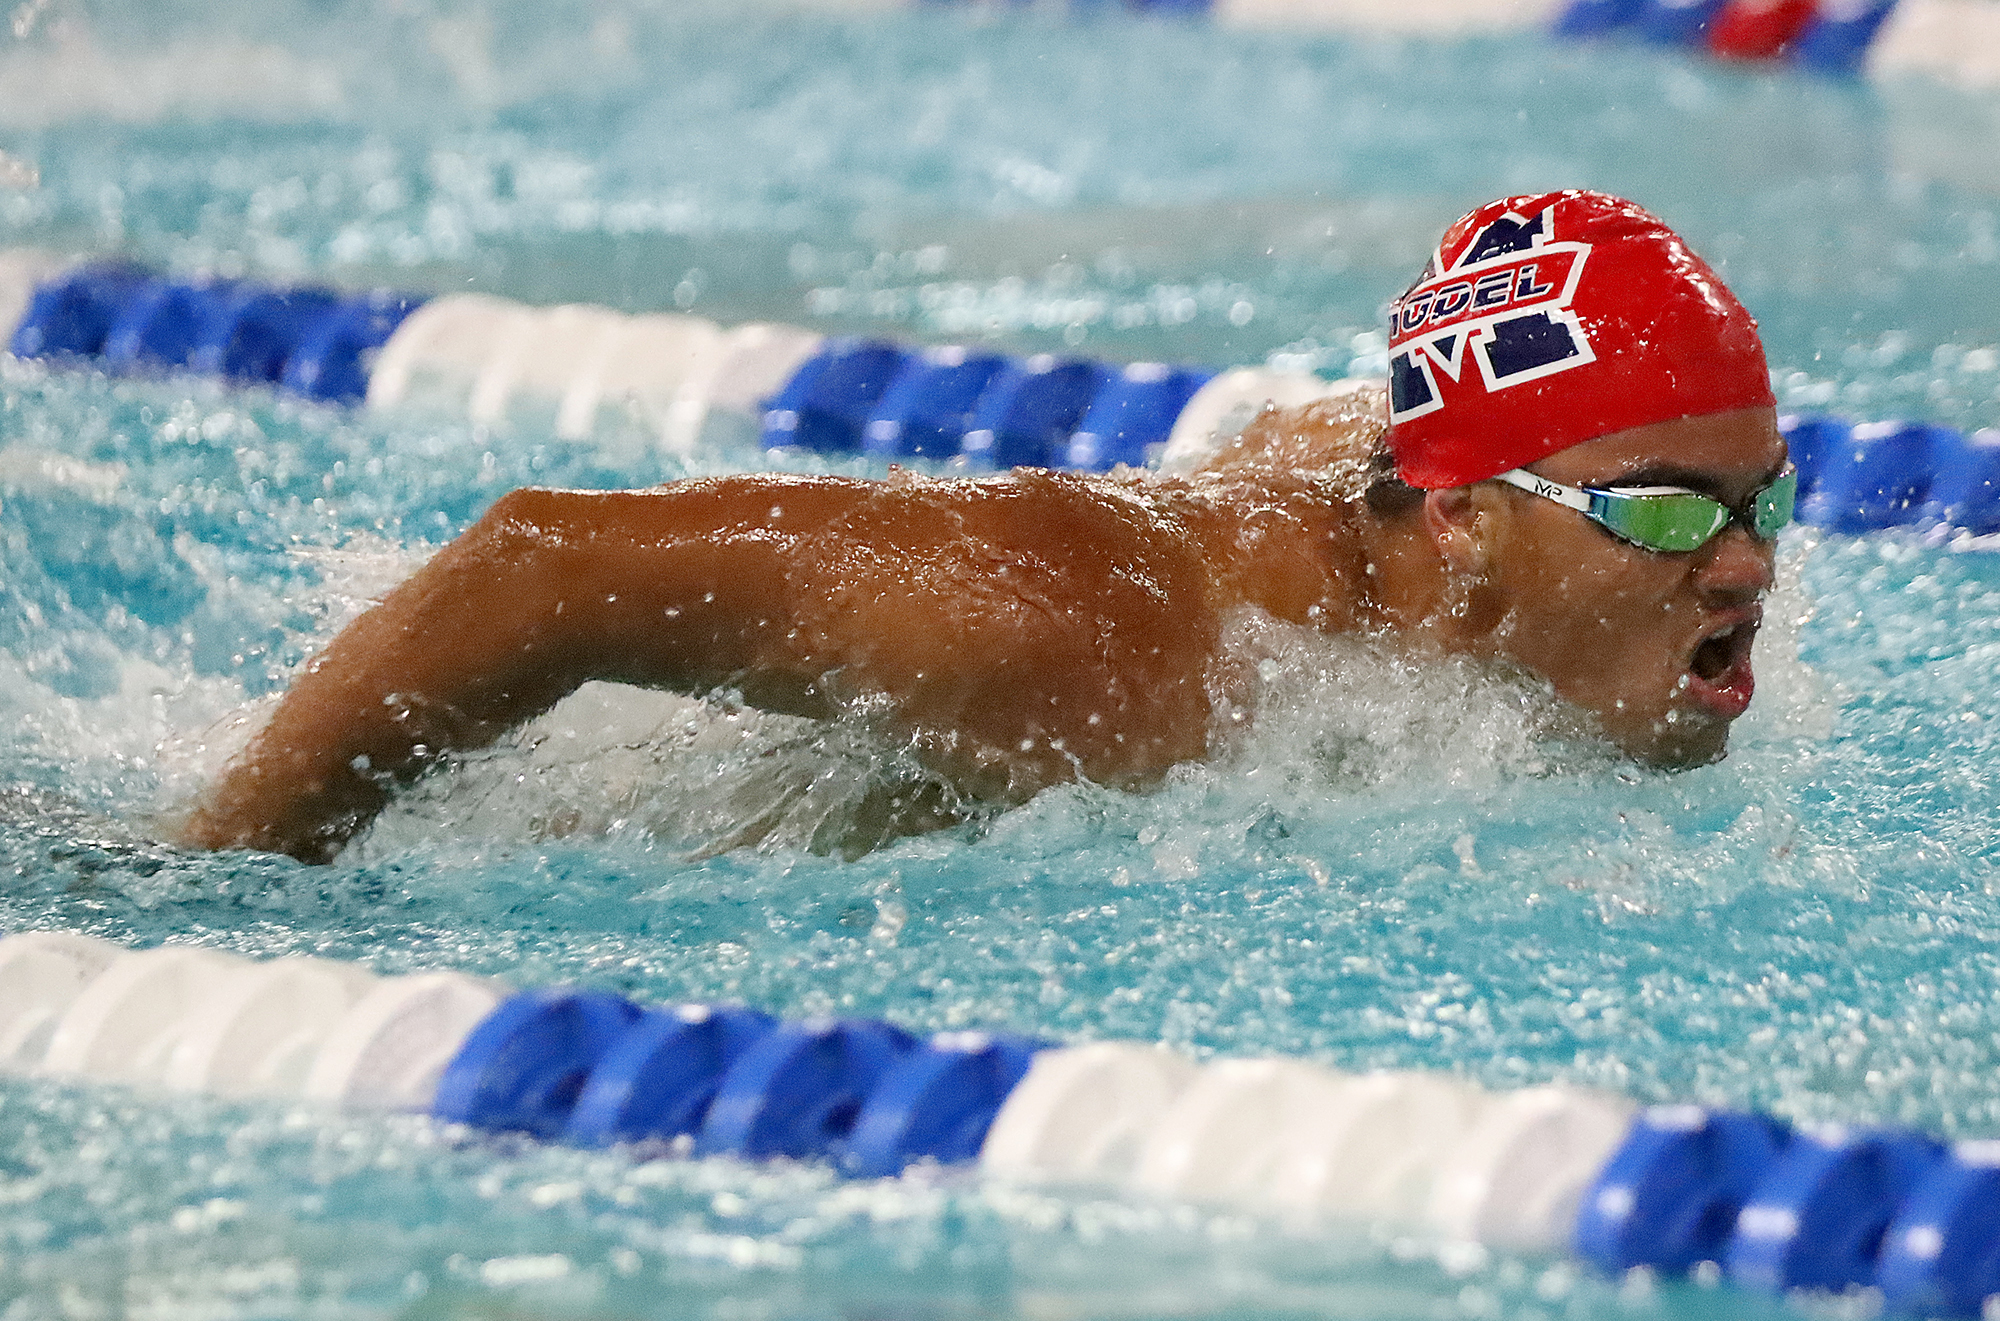 Student swimming at a meet